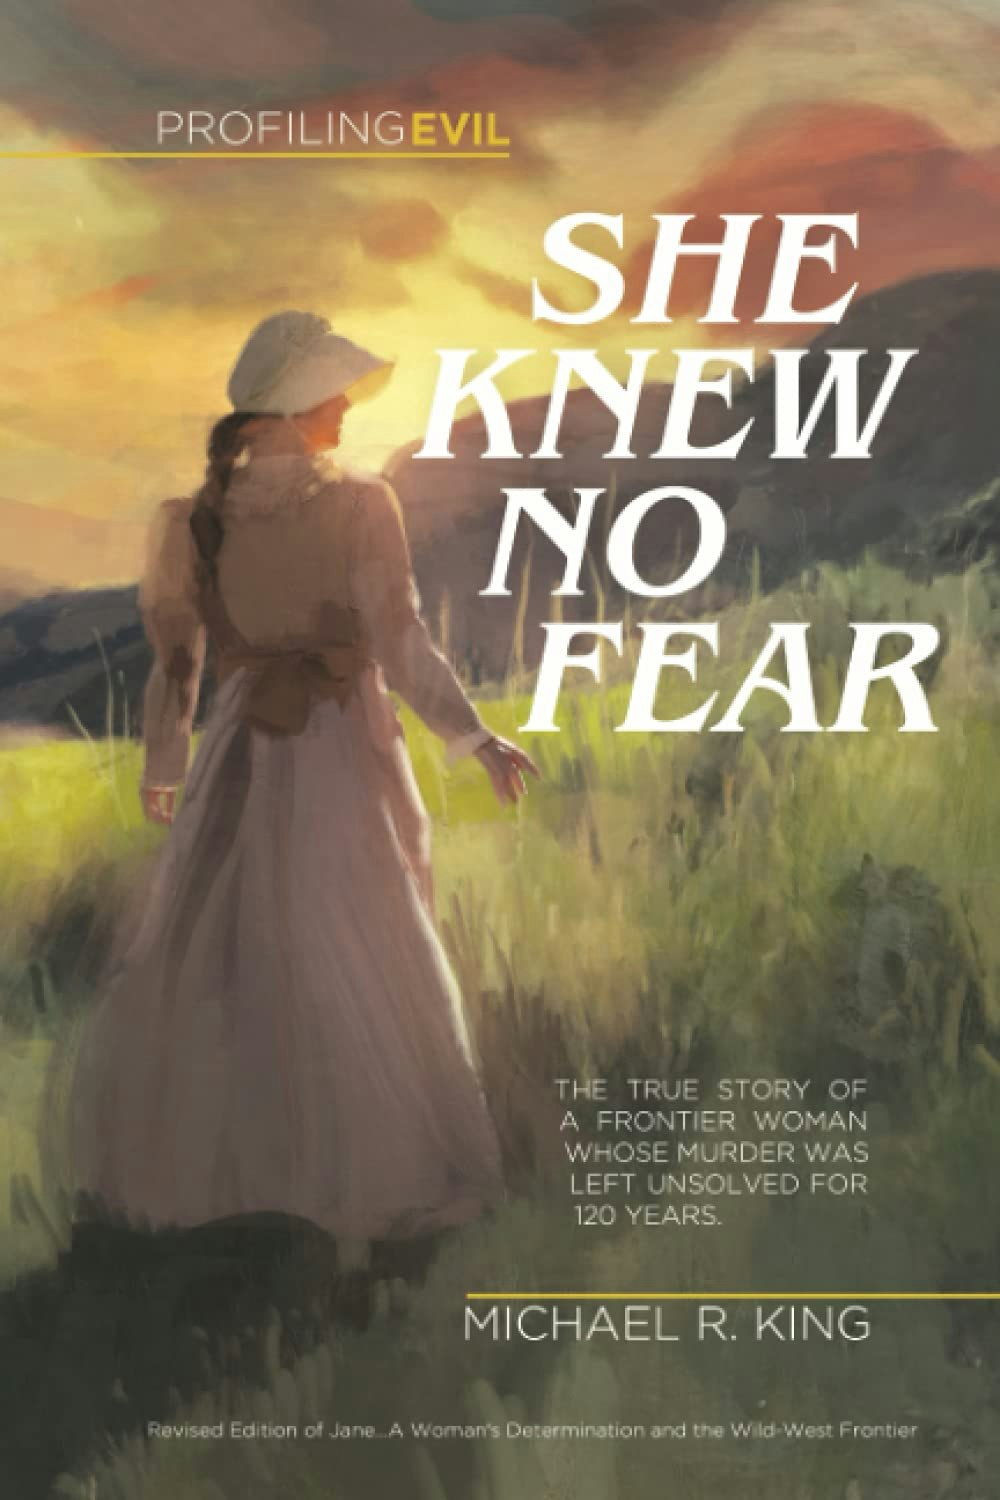 Interview with Mike King regarding his new book She Knew No Fear: The True Story of Pioneer Jane McKechnie Walton's Incredible Journey and Untimely Death